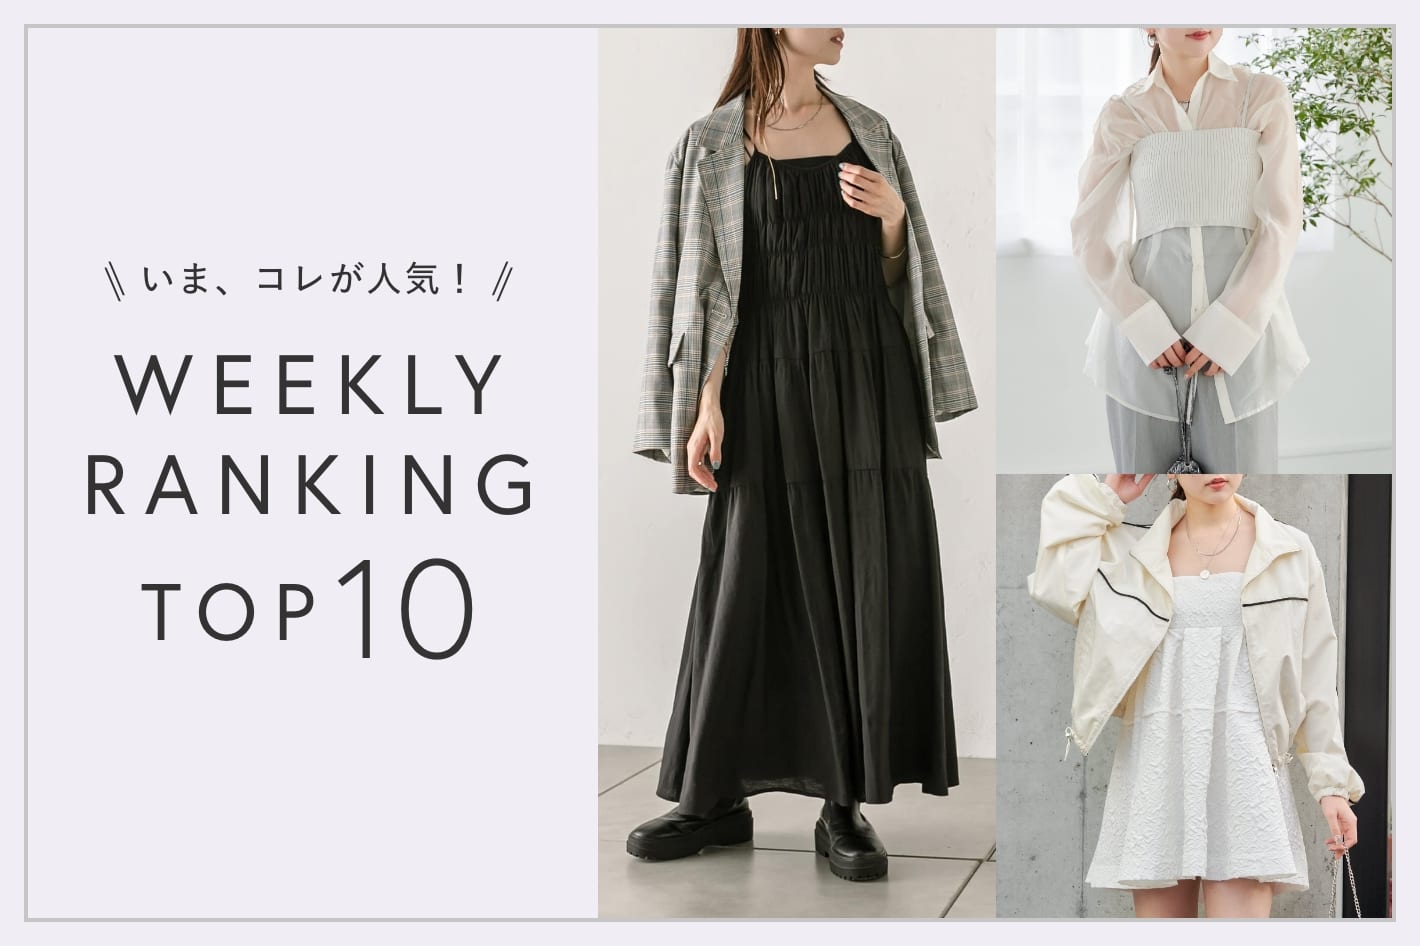 OUTLET いま、これが人気！WEEKLY RANKING TOP10！